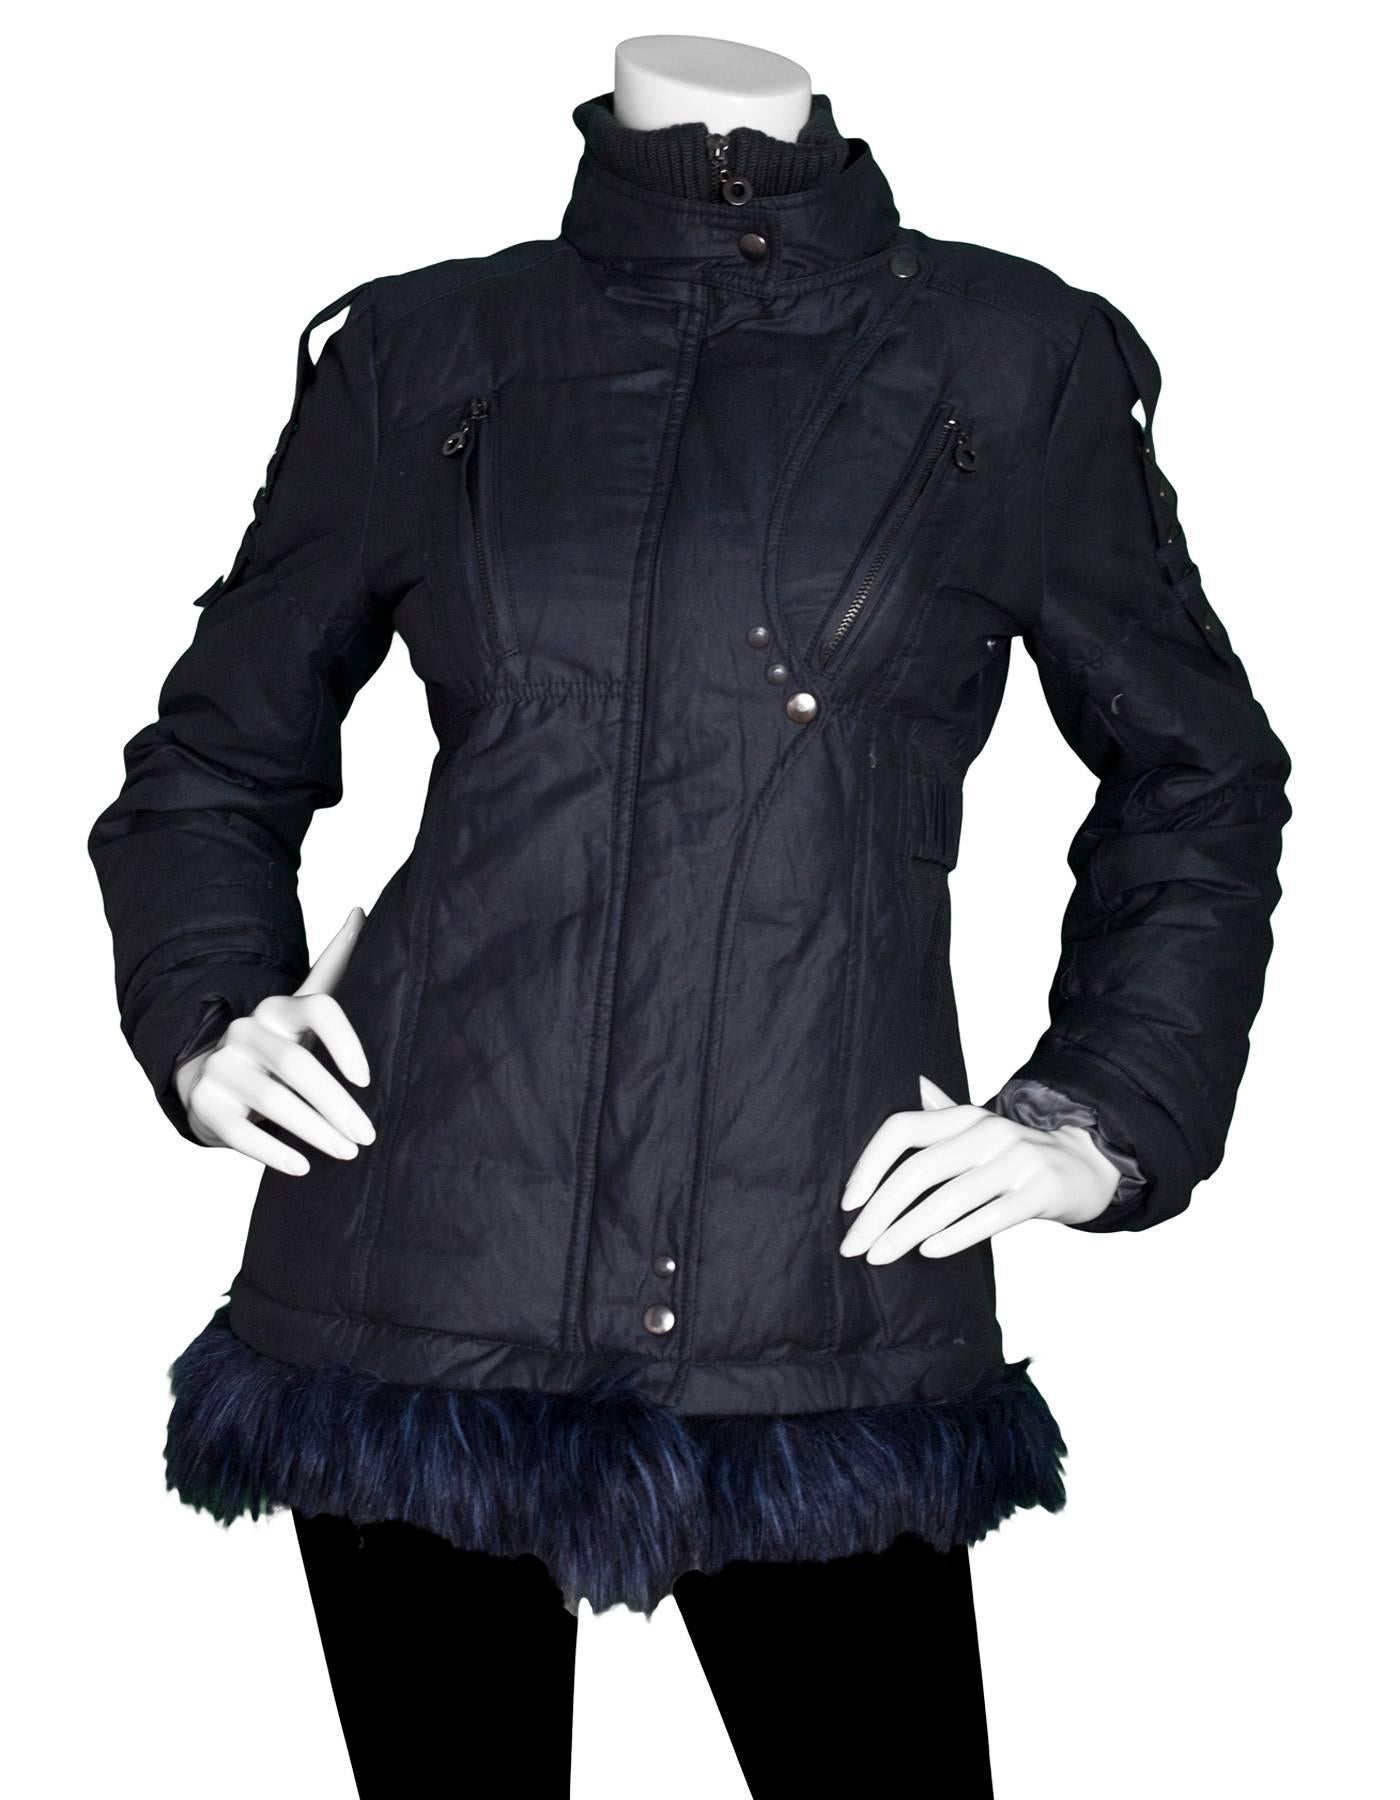 Navy Metallic Zip Jacket with Fur Trim

Features removable faux fur trim

Color: Navy metallic
Composition: unknown, feels like nylon blend
Lining: Grey textile
Closure/Opening: Front zip closure
Exterior Pockets: Hip pockets and chest zip